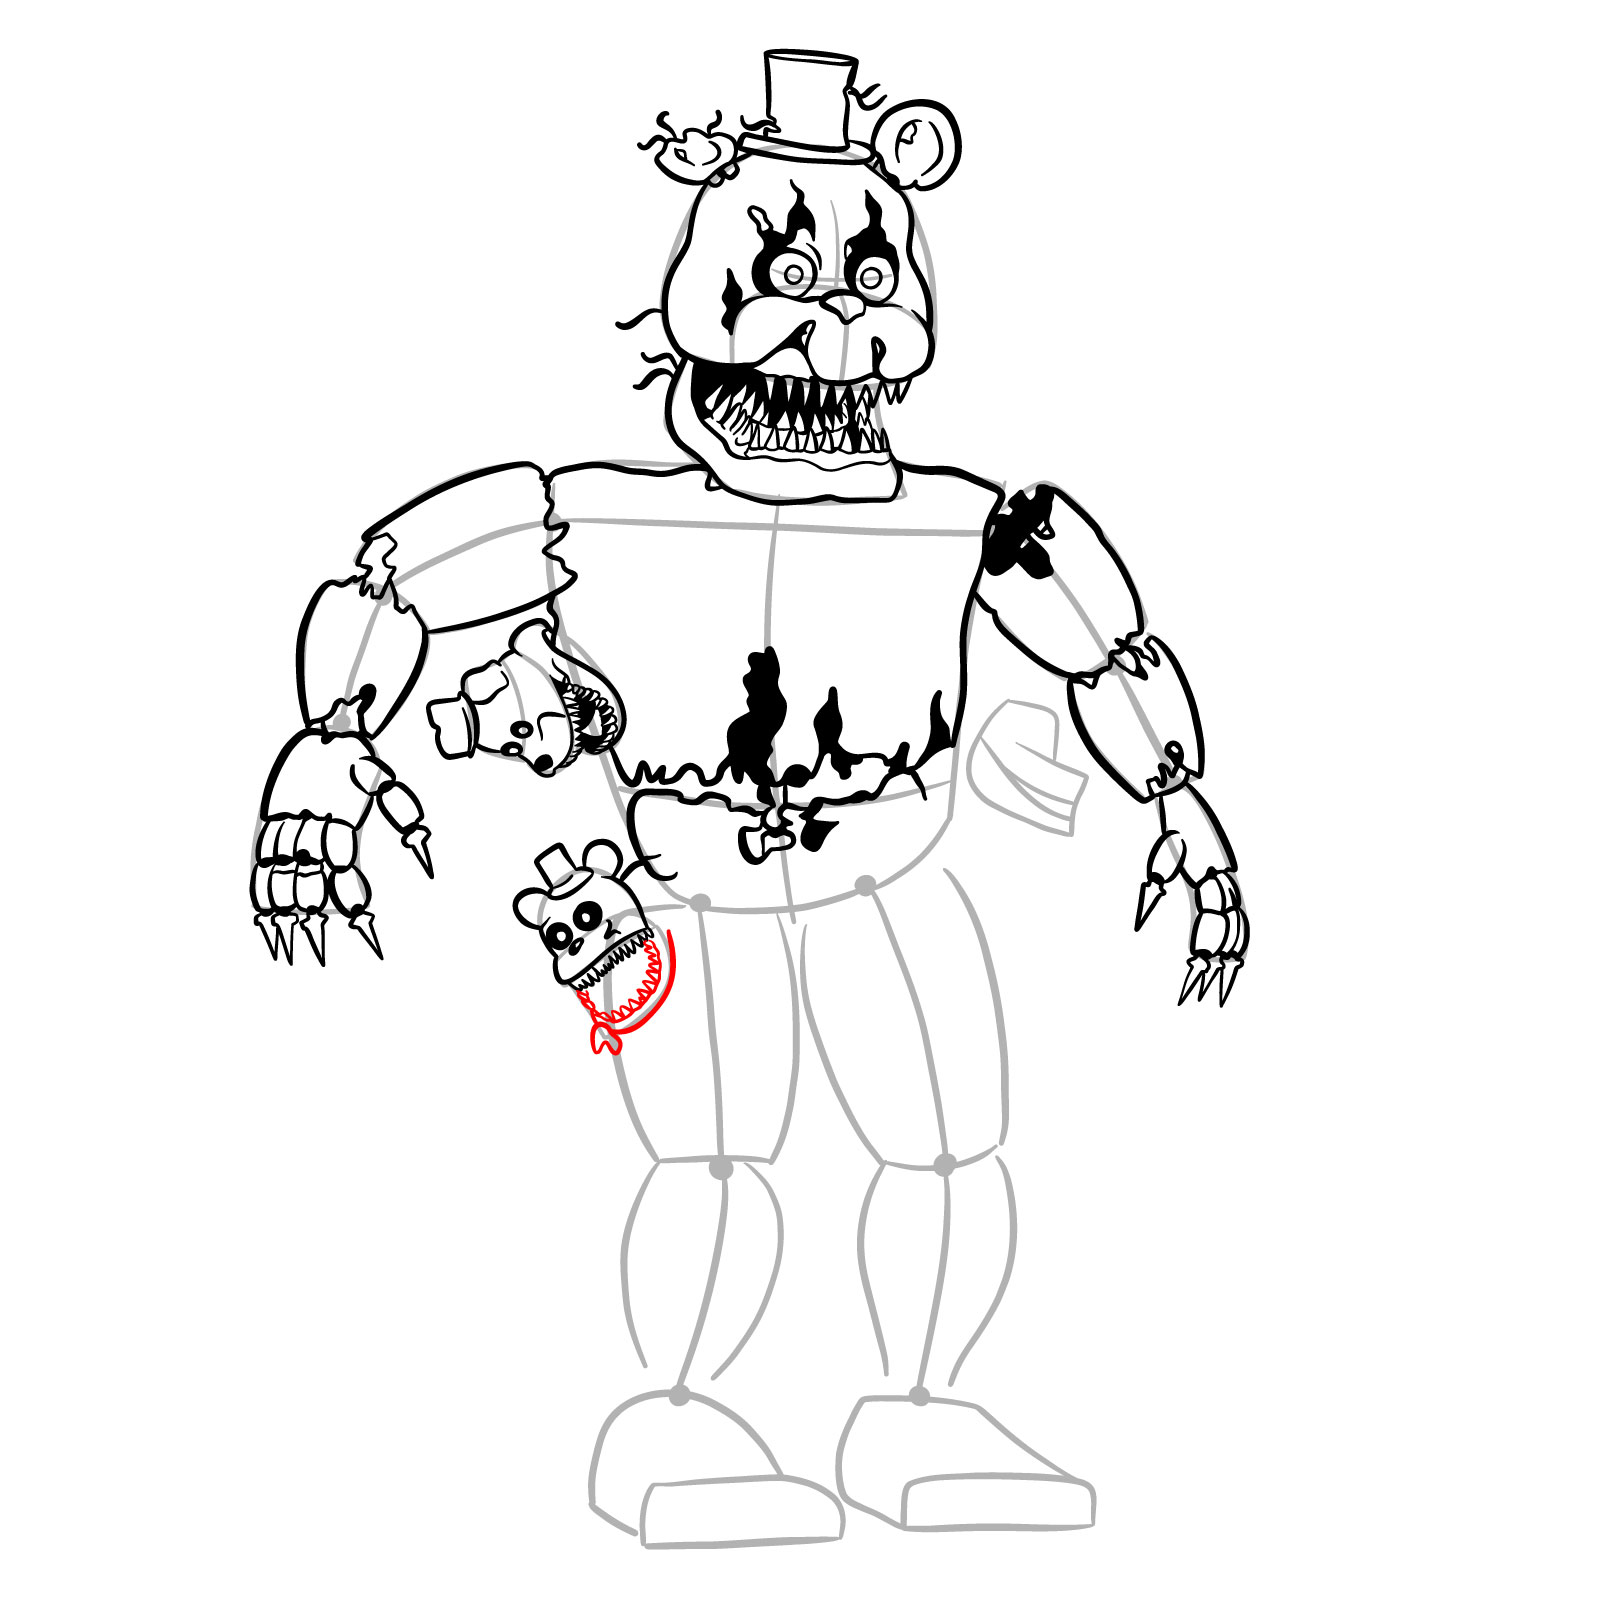 How to draw Nightmare Freddy - step 33